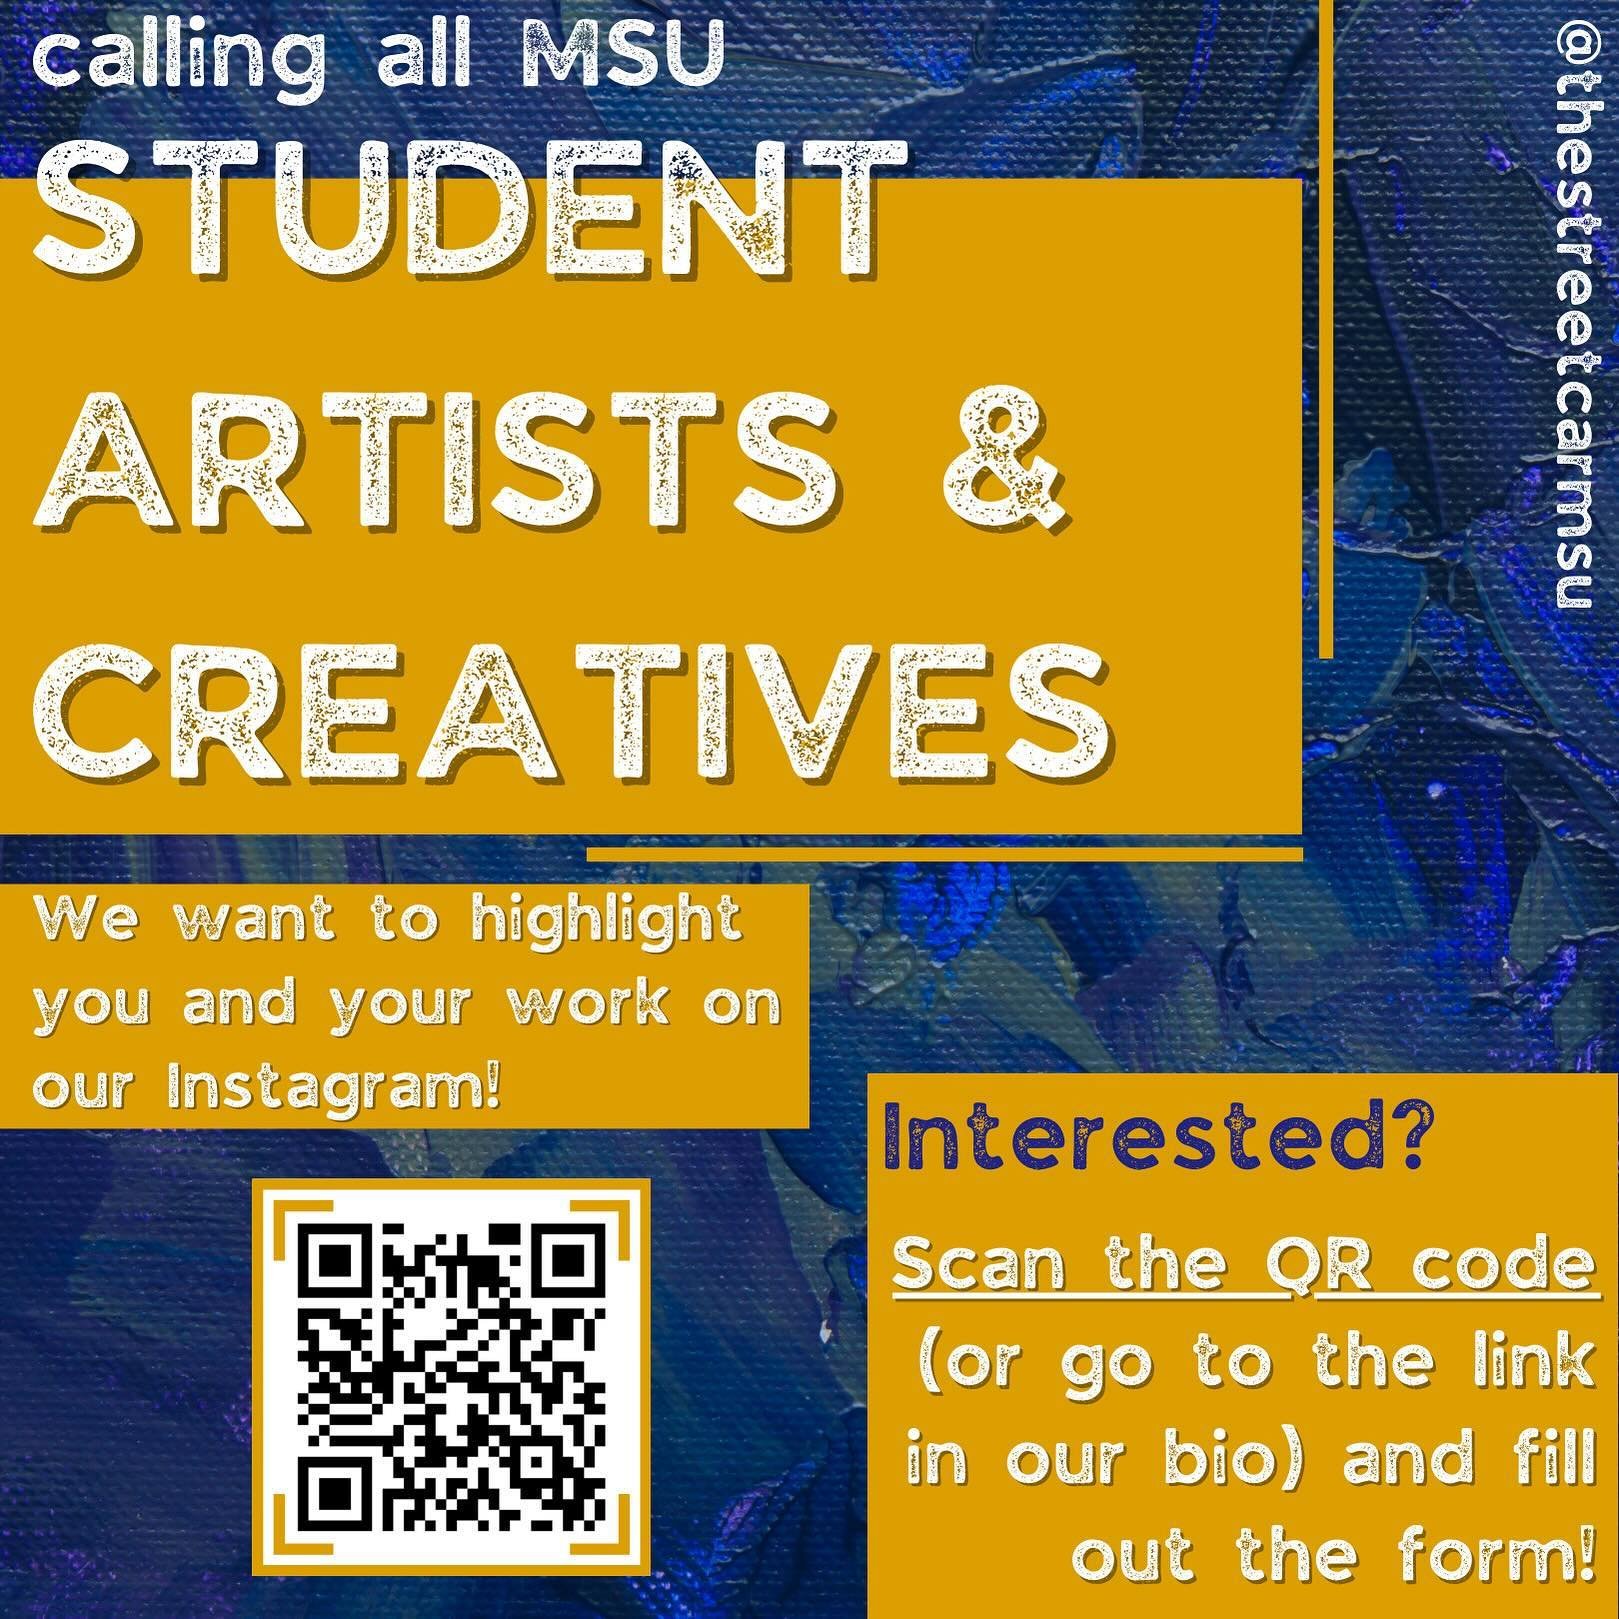 Happy March, everyone! We wanted to provide an opportunity for any and all student artists here at MSU to share themselves and their work, so for the remainder of the spring semester, we will be making and posting student artist/creative highlights v